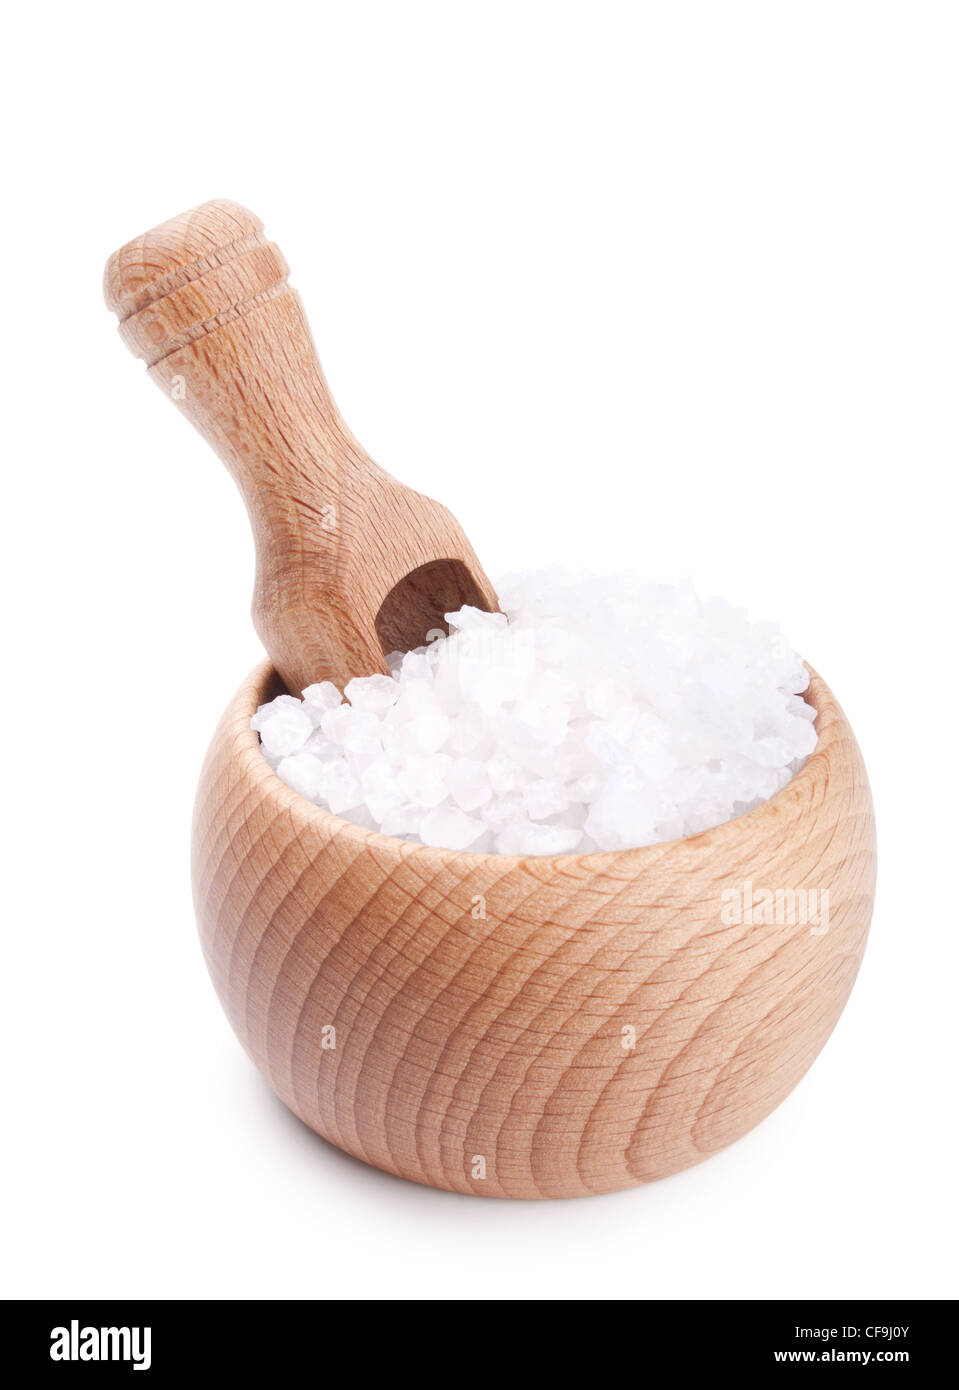 Wooden scoop in bowl full of sea salt isolated on white background Stock Photo